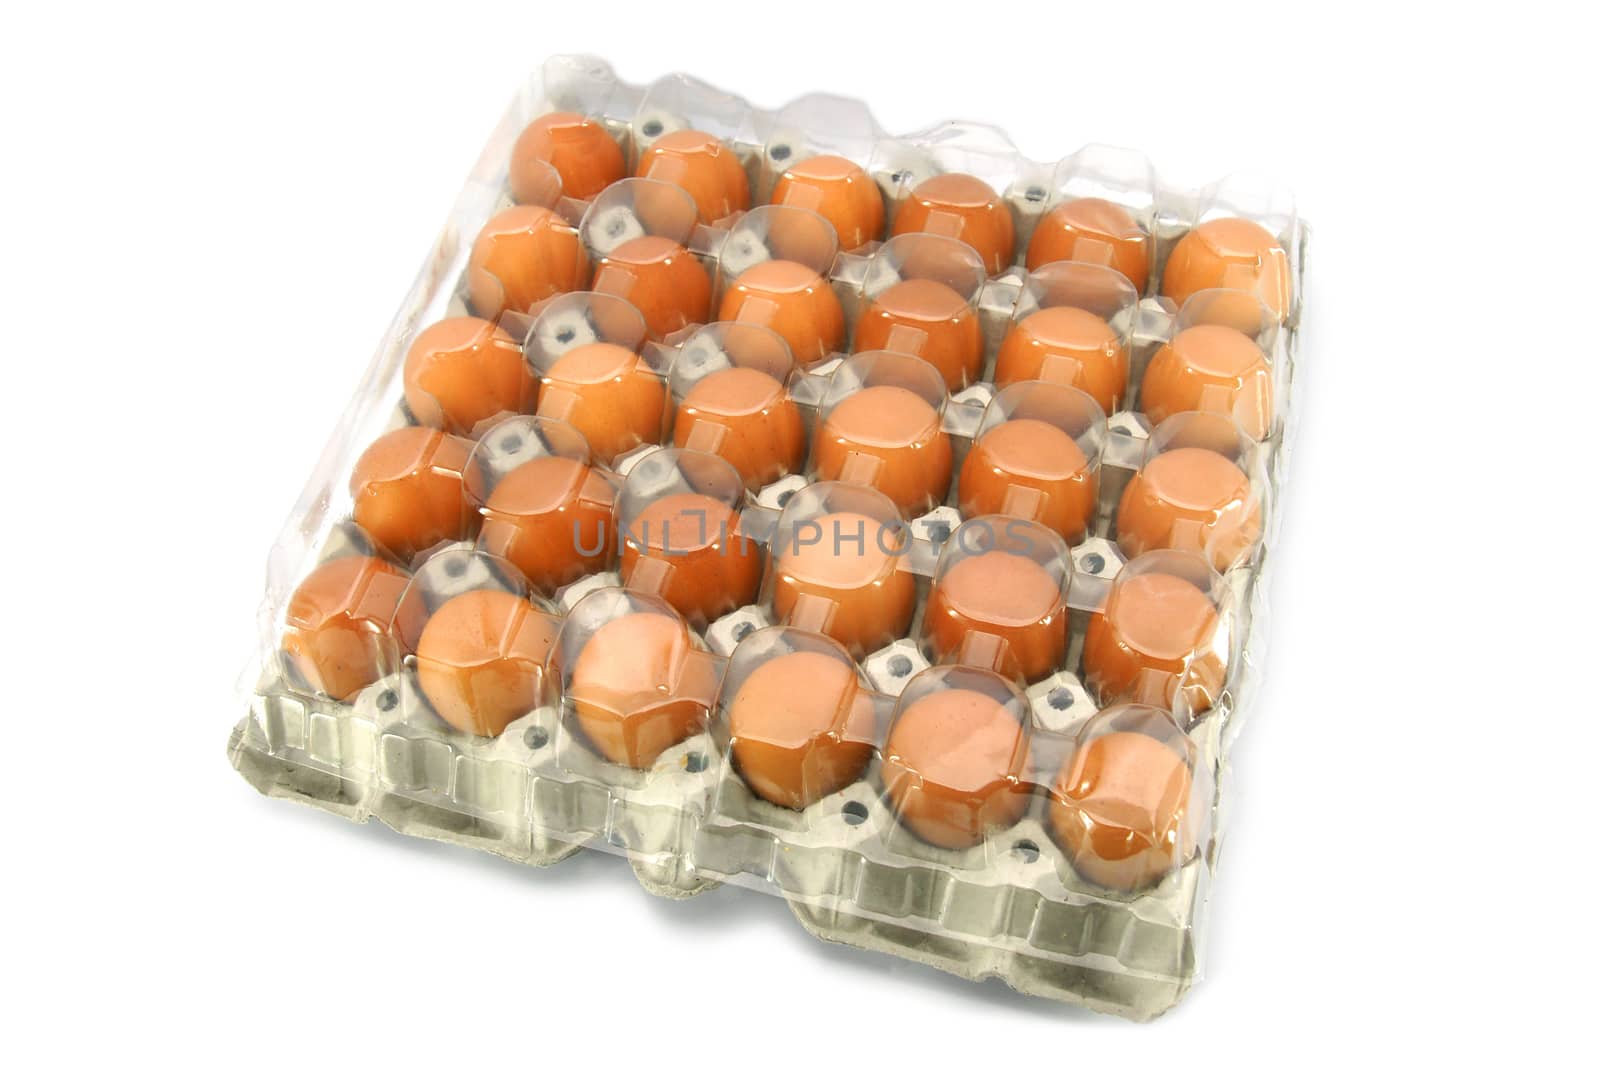 Eggs from chicken farm in the package by mranucha